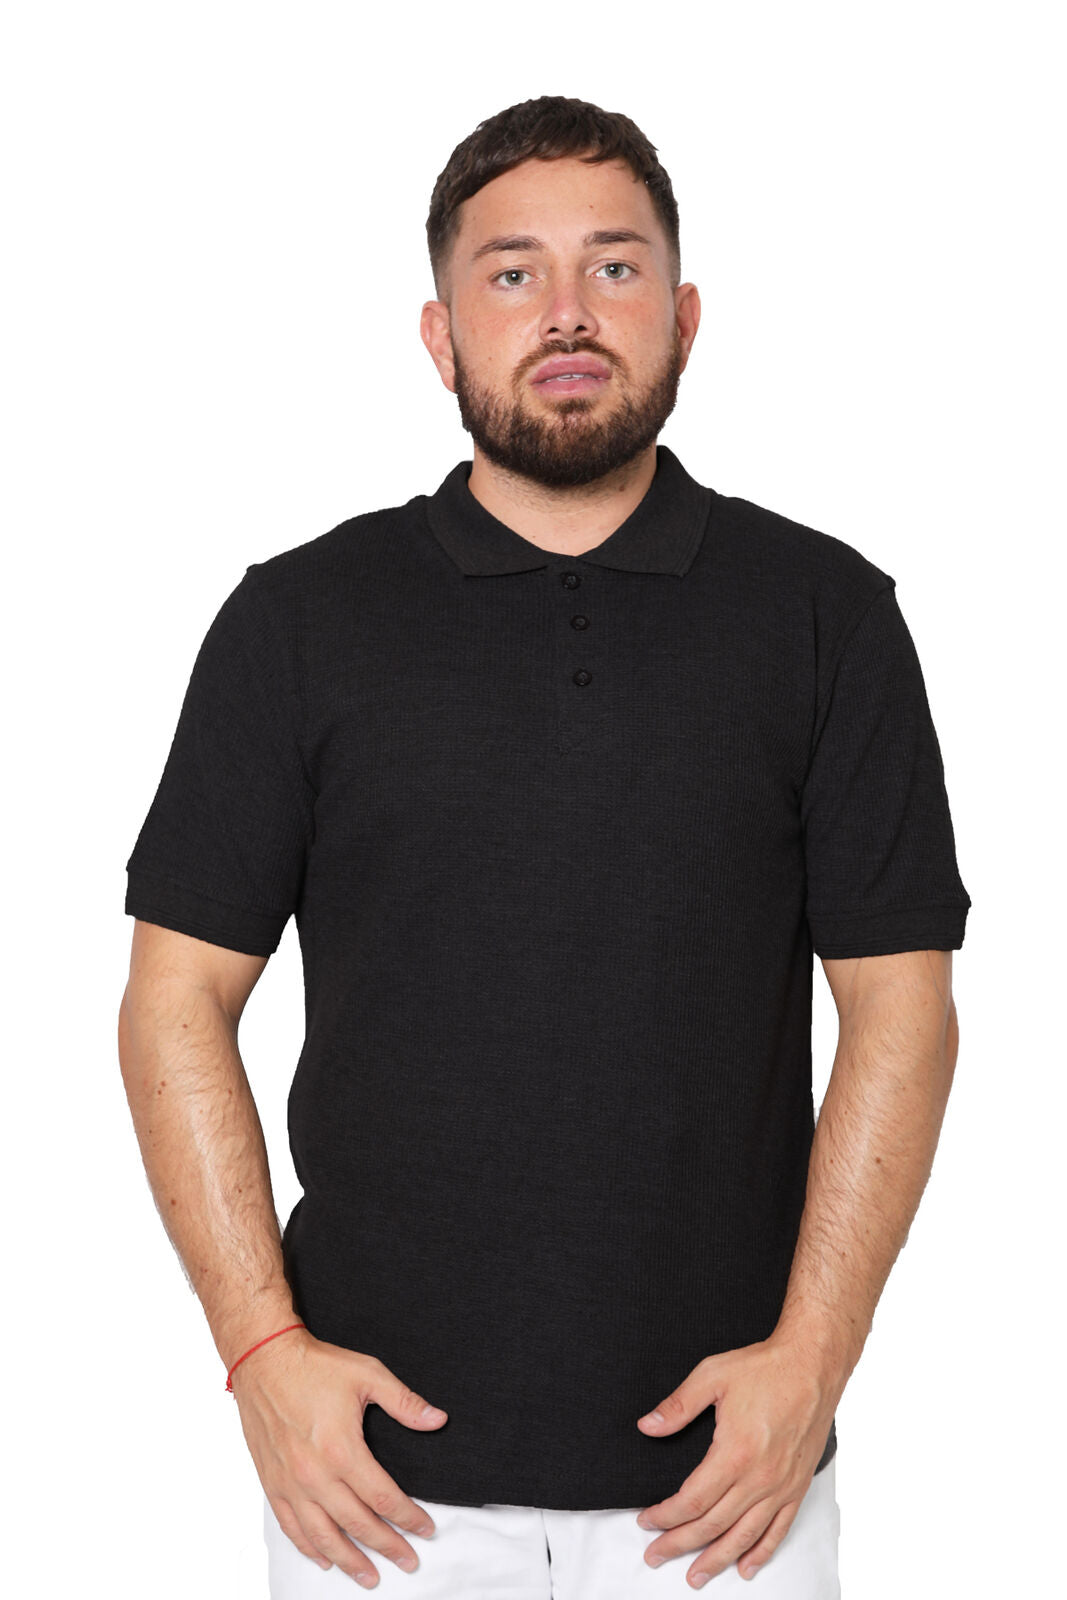 Men's Short Sleeve T-Shirt with 3 Buttons and Pique Polo Collar - Black